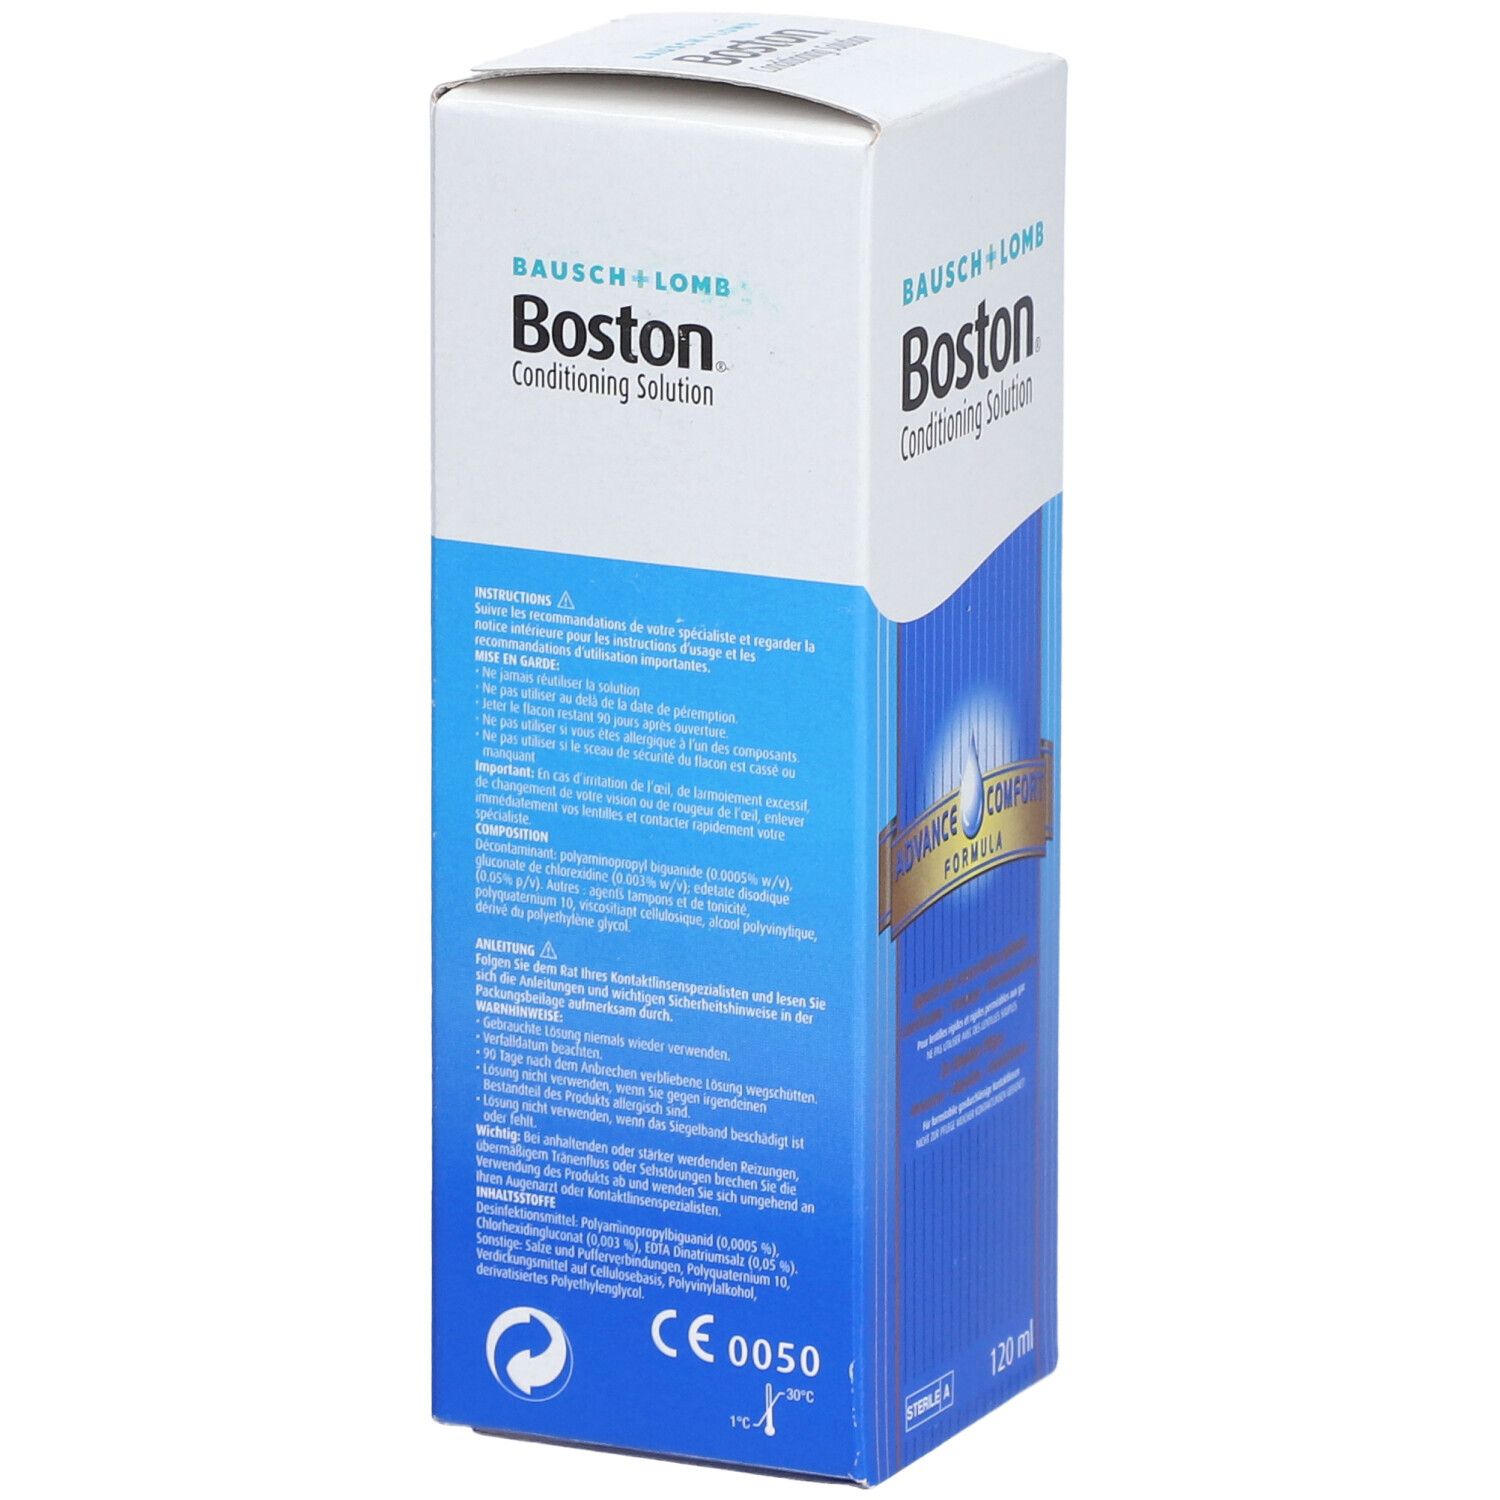 Bausch Lomb Boston Hard Condition Solution 120 ml